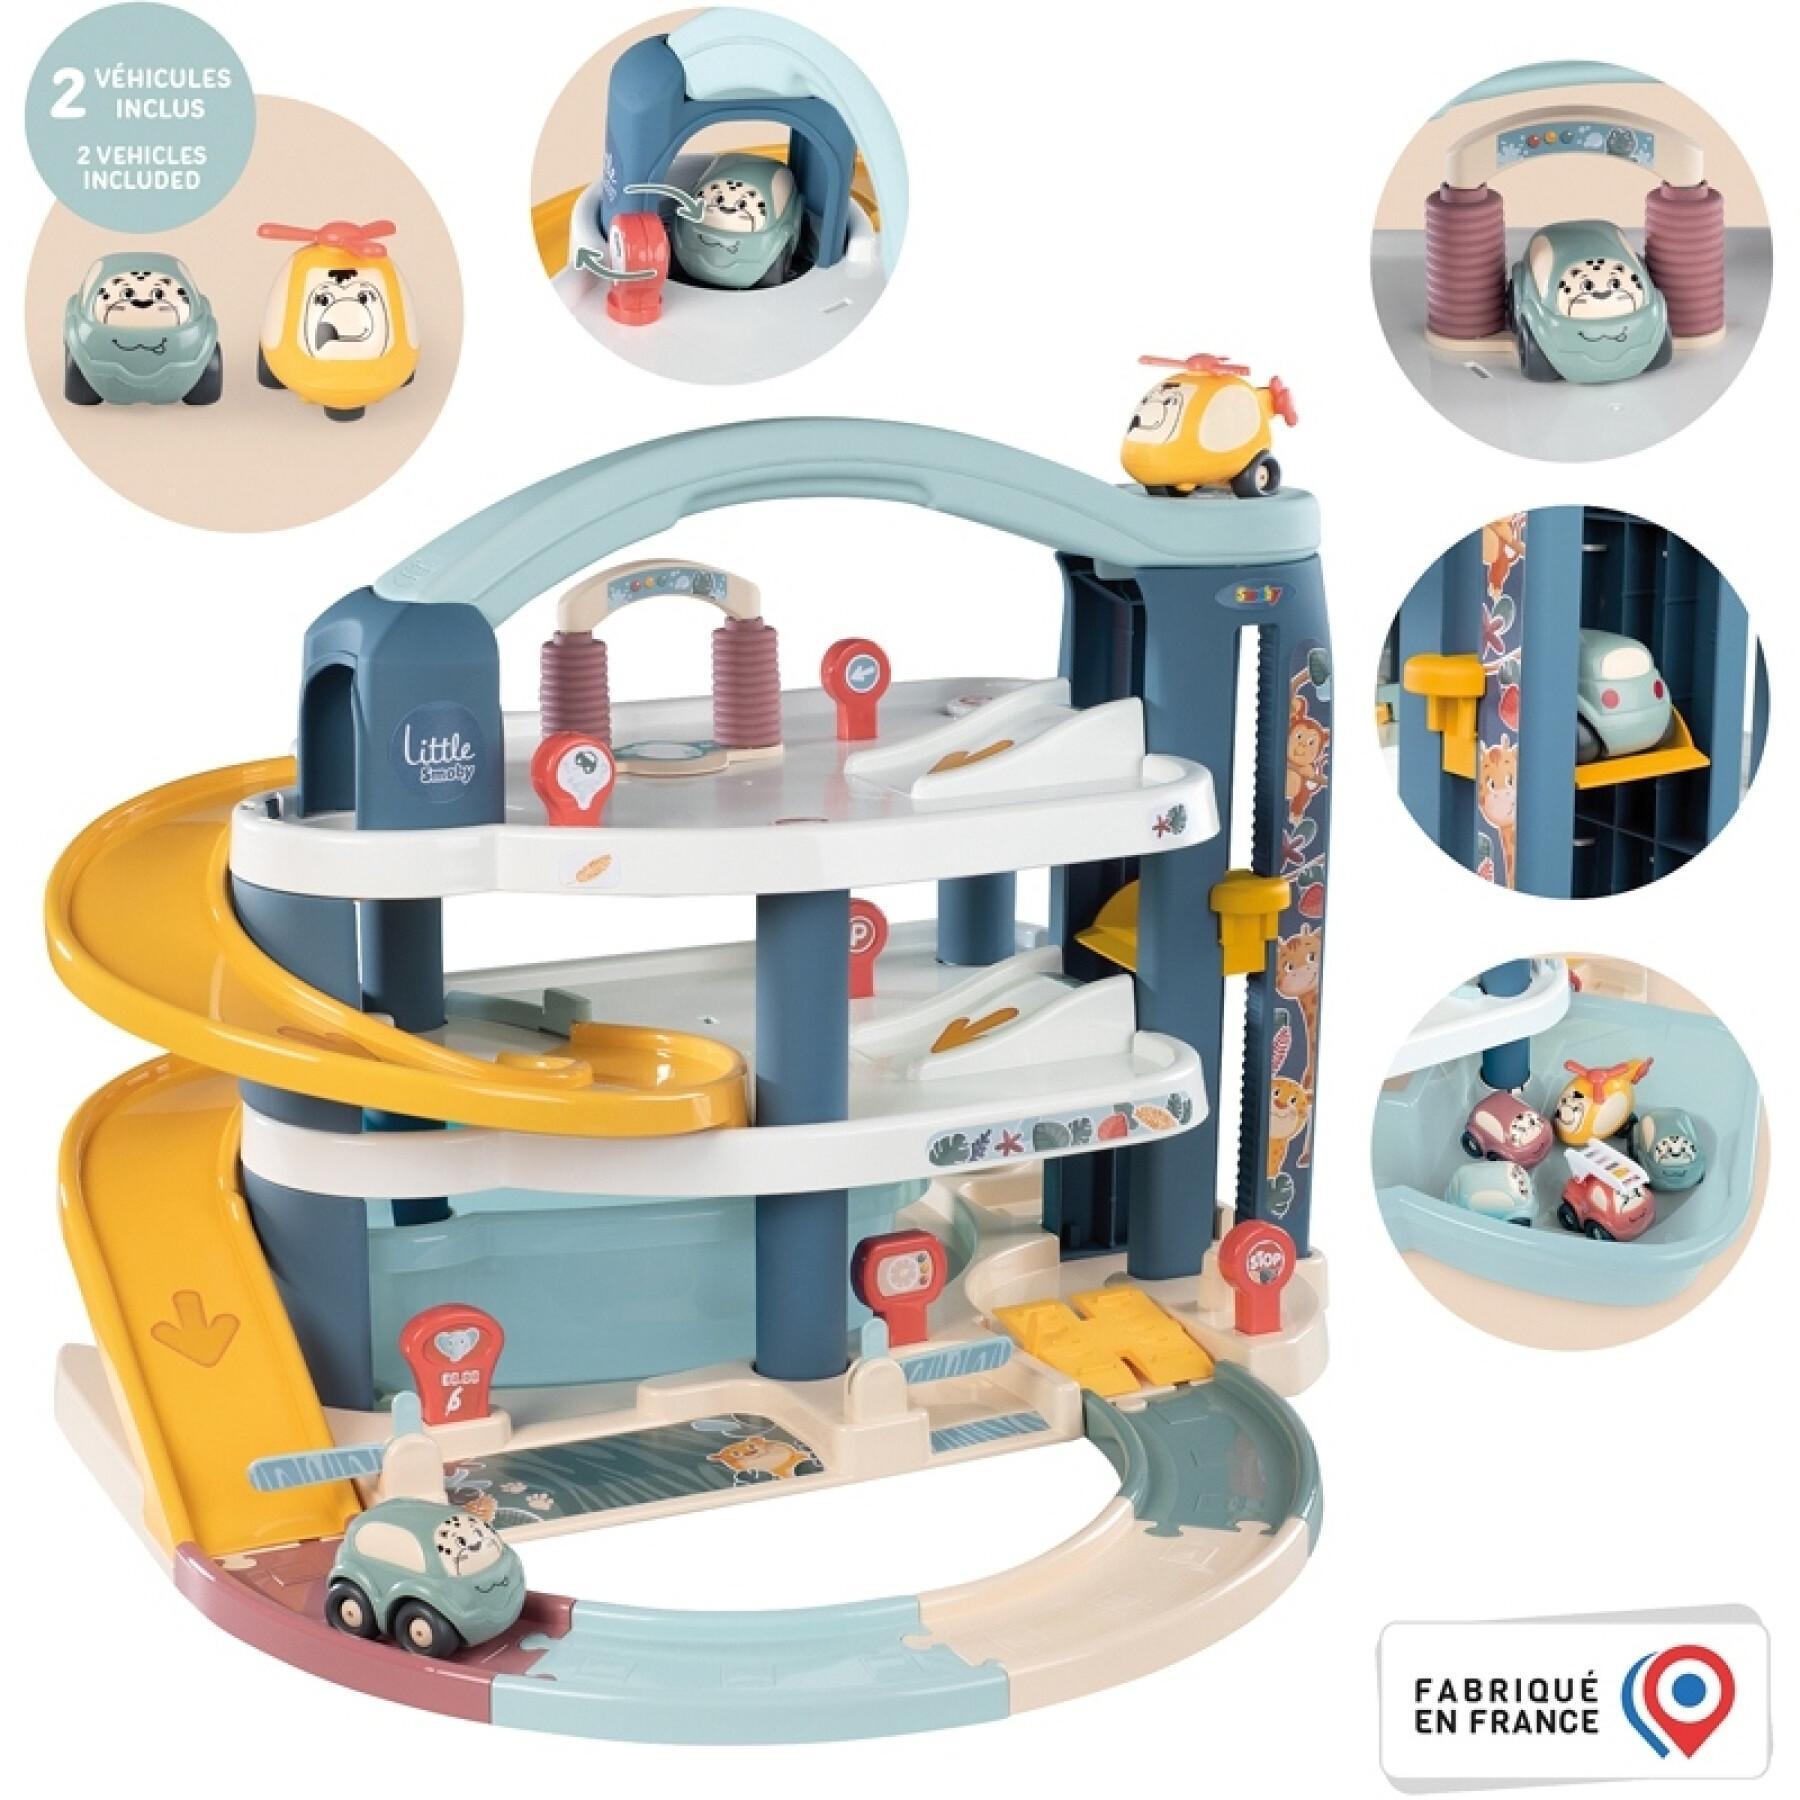 Le grand garage learning games Smoby